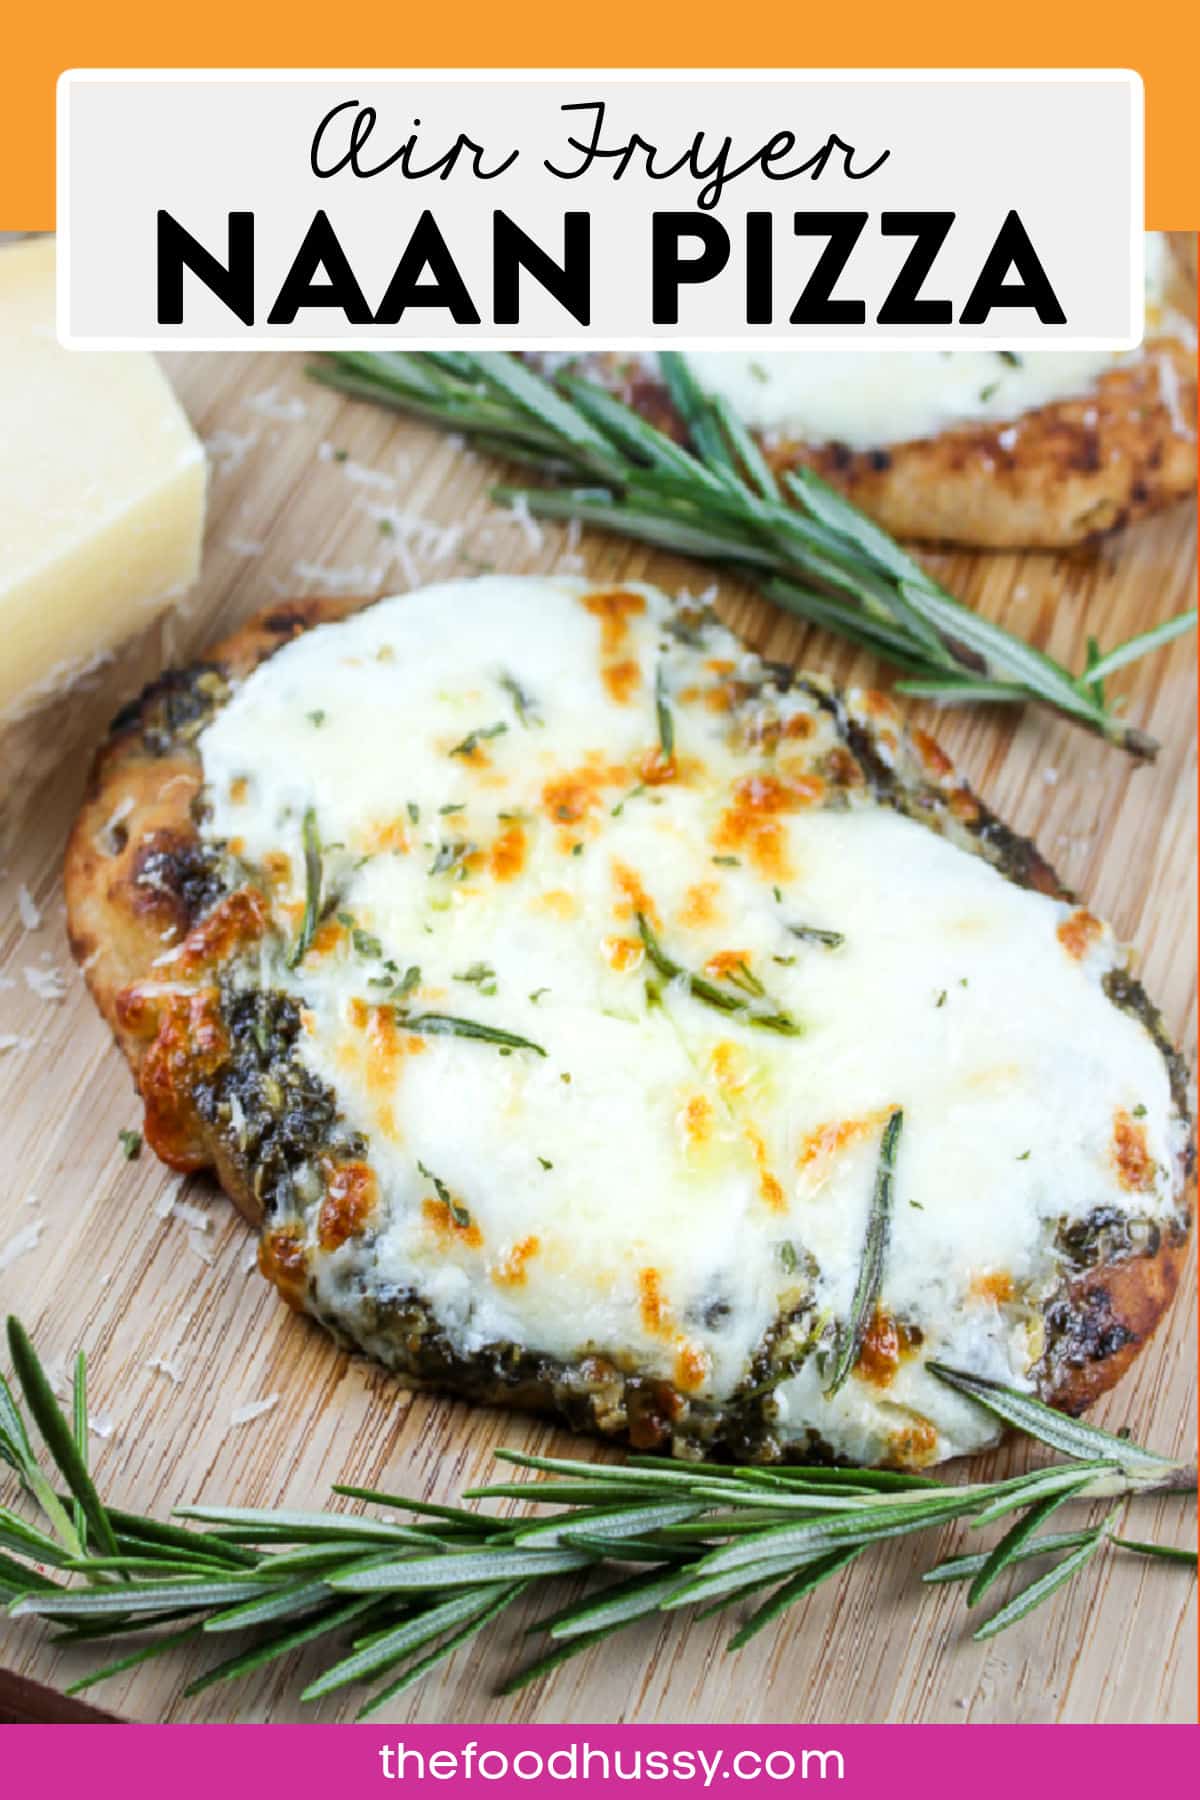 Naan Pizza in the air fryer is one of my favorite quick meals or snacks! Whether you want all the toppings or something simple like this white pizza - the air fryer will have this lunch done in less than 5 minutes! via @foodhussy